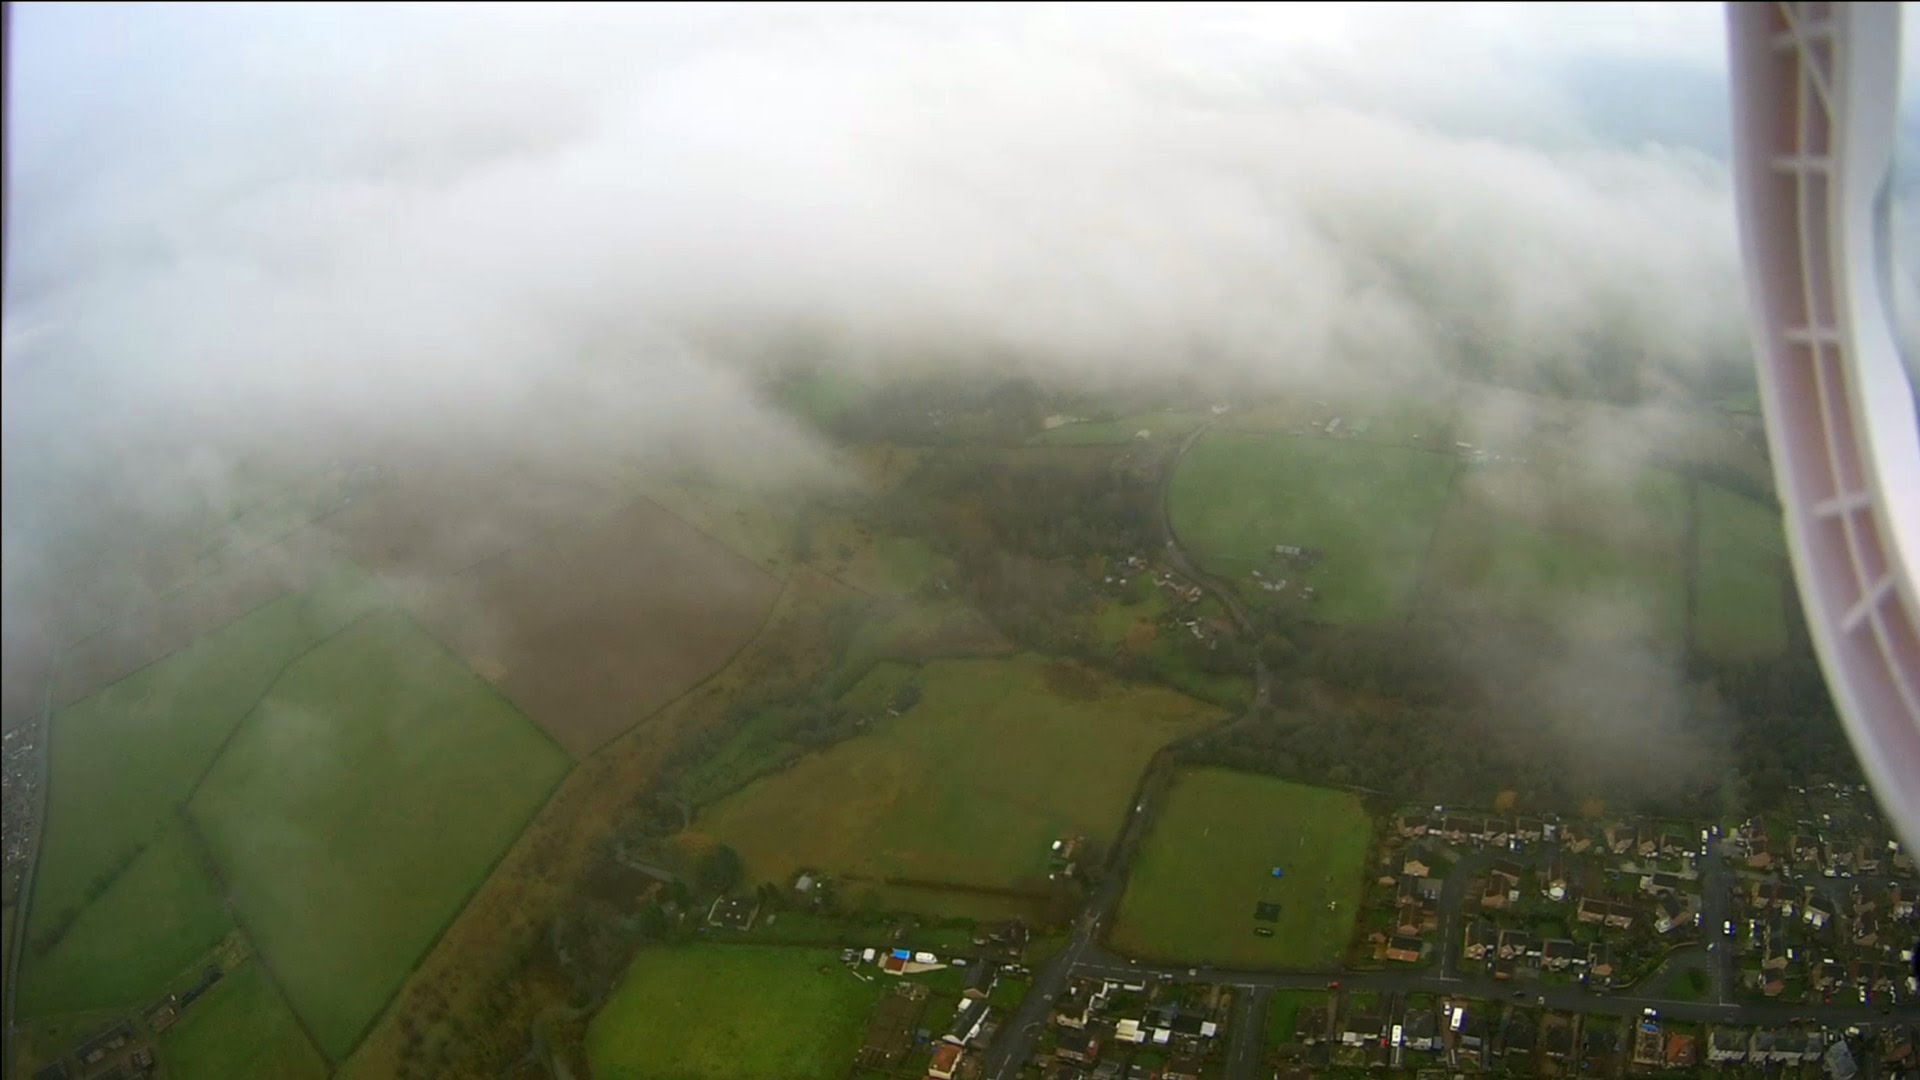 Cheerson CX-20 Quadcopter: High Altitude Flight Above Clouds